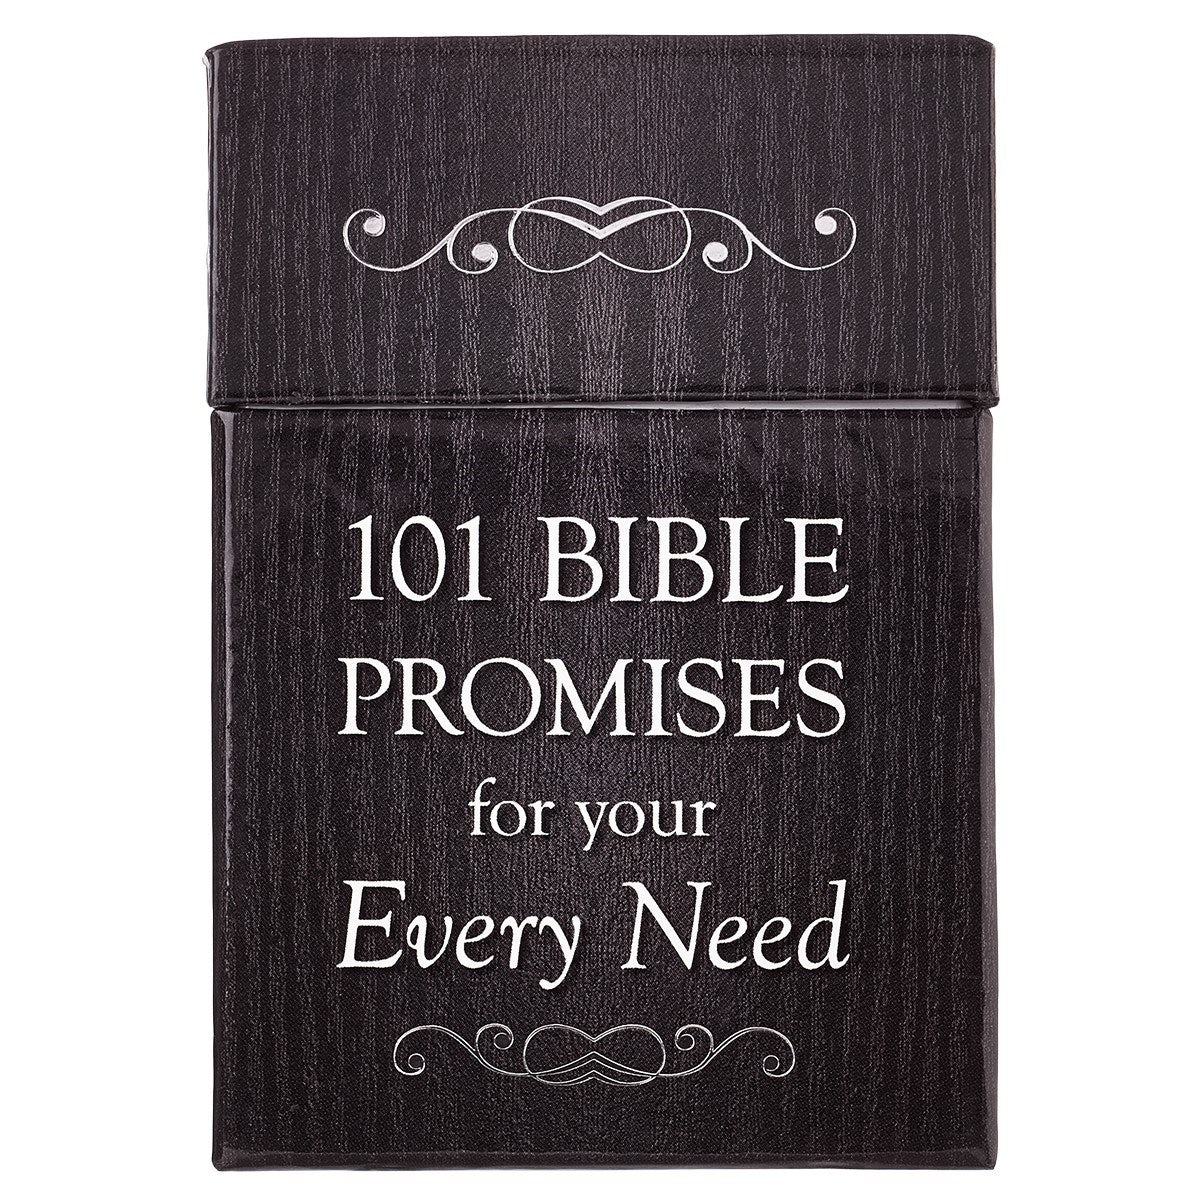 Seed of Abraham Christian Bookstore - (In)Courage - Box Of Blessings-101 Bible Promises For Your Every Need